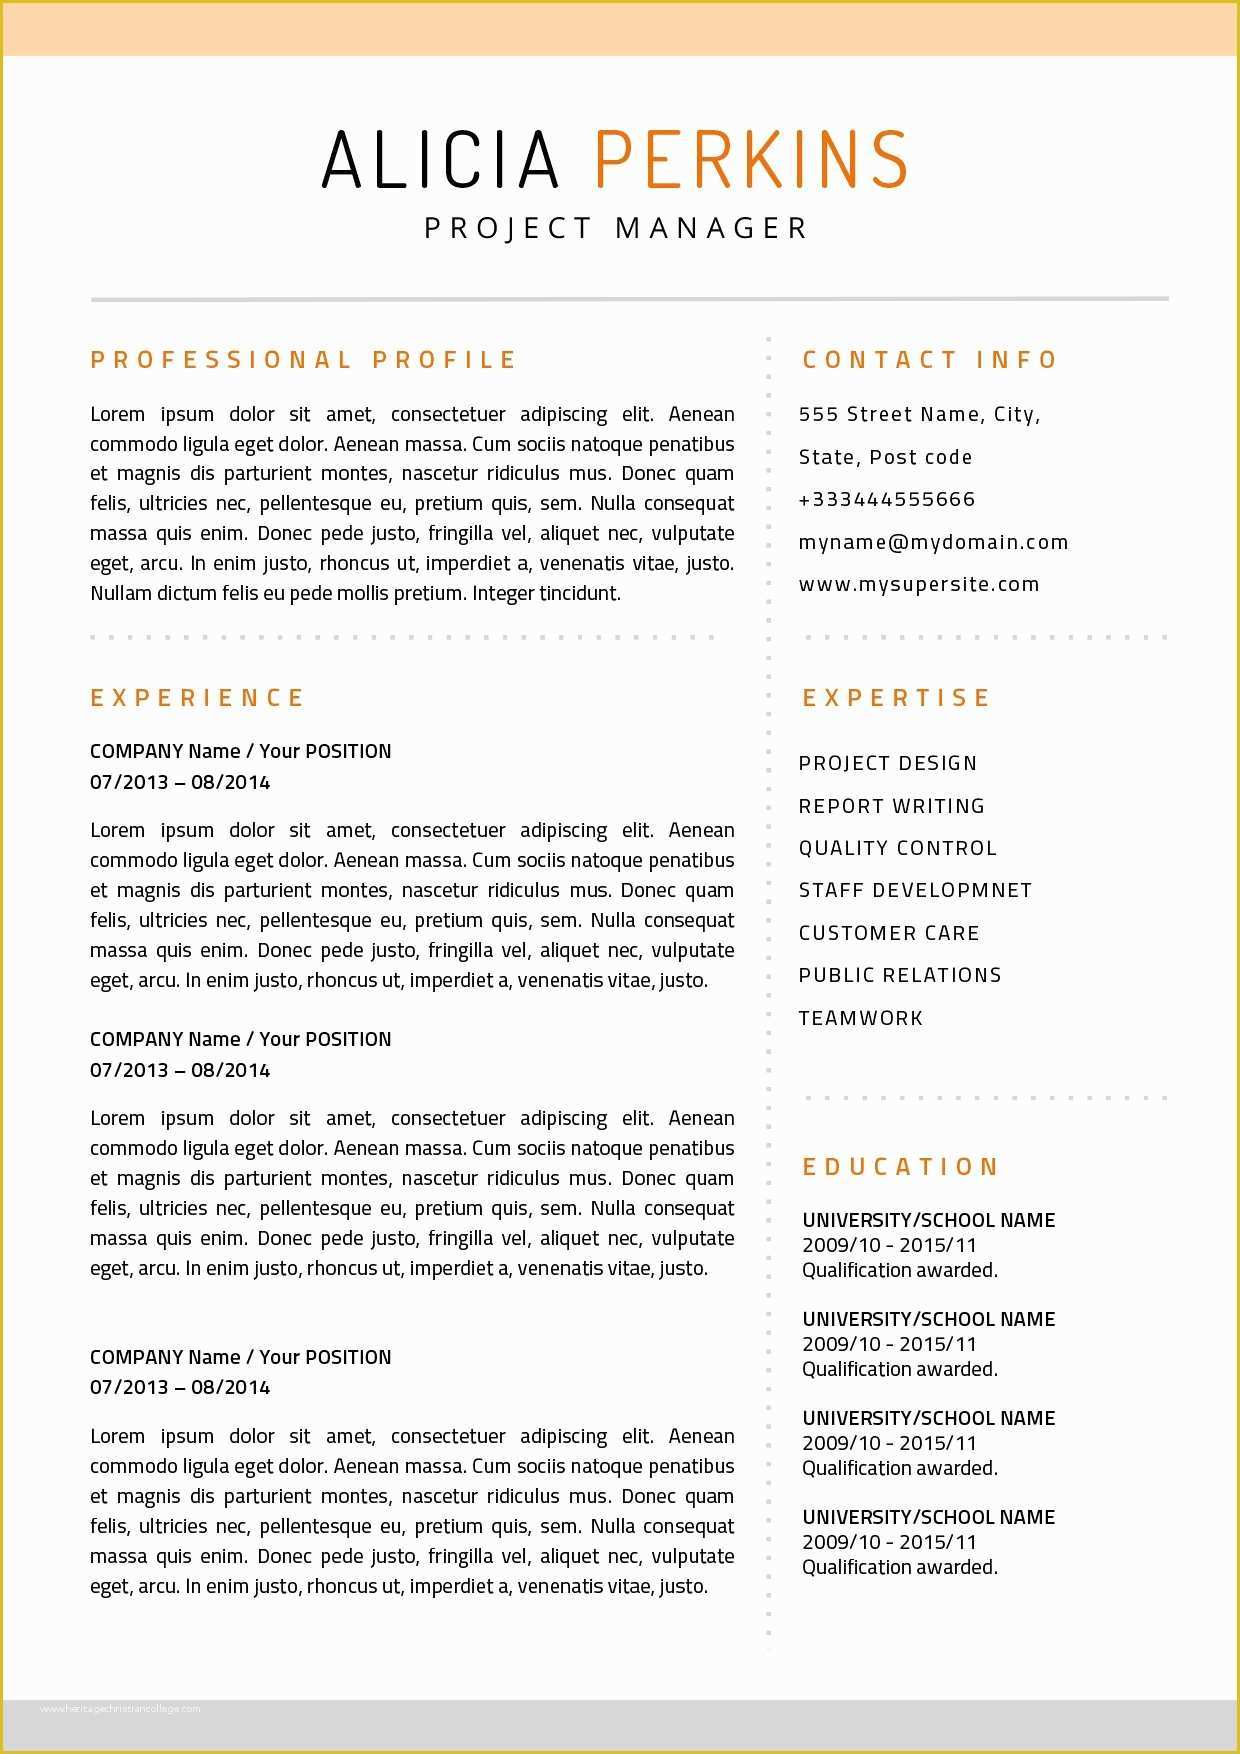 Free Resume Templates for Mac Of Free Creative Resume Templates for Mac Pages